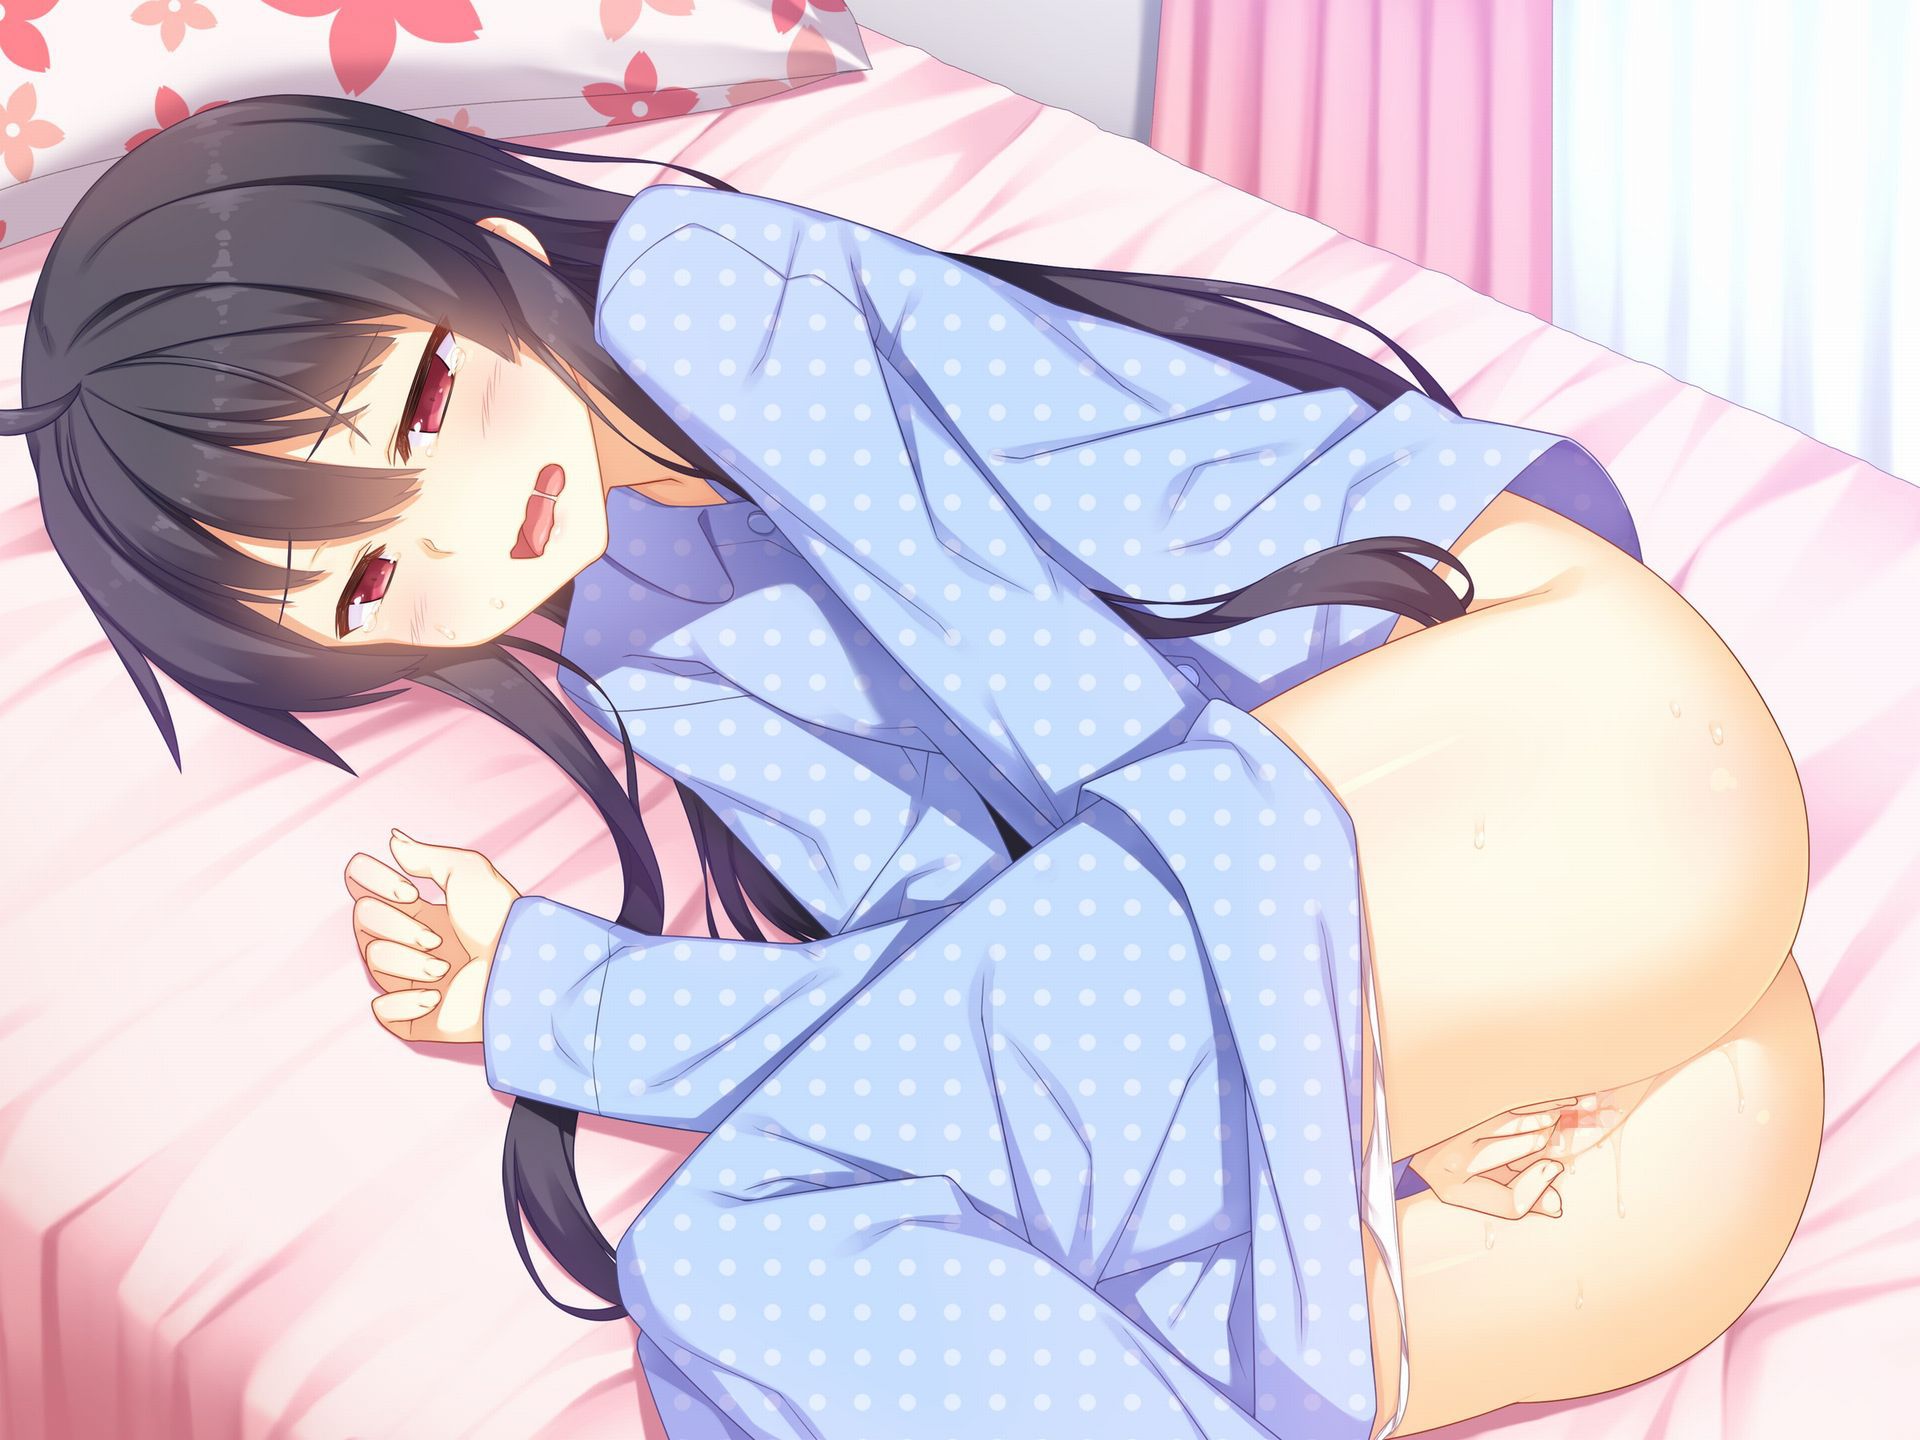 【Erotic Anime Summary】 Erotic image of a girl masturbating by playing with her fingers or rubbing her 【Secondary erotic】 14